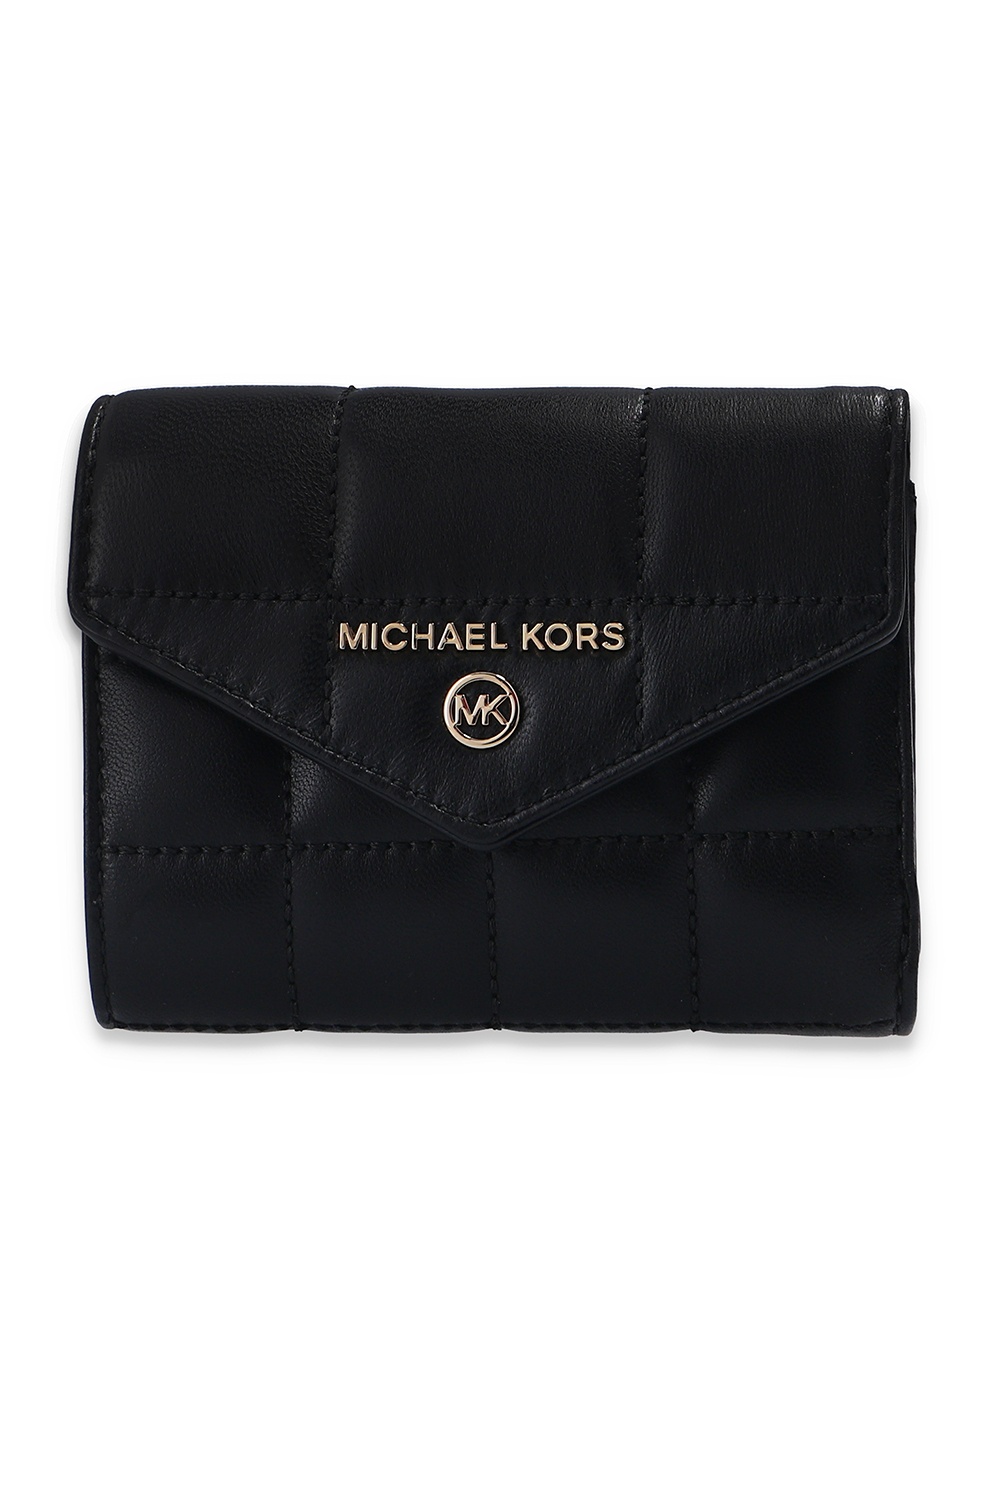 michael kors quilted wallet black